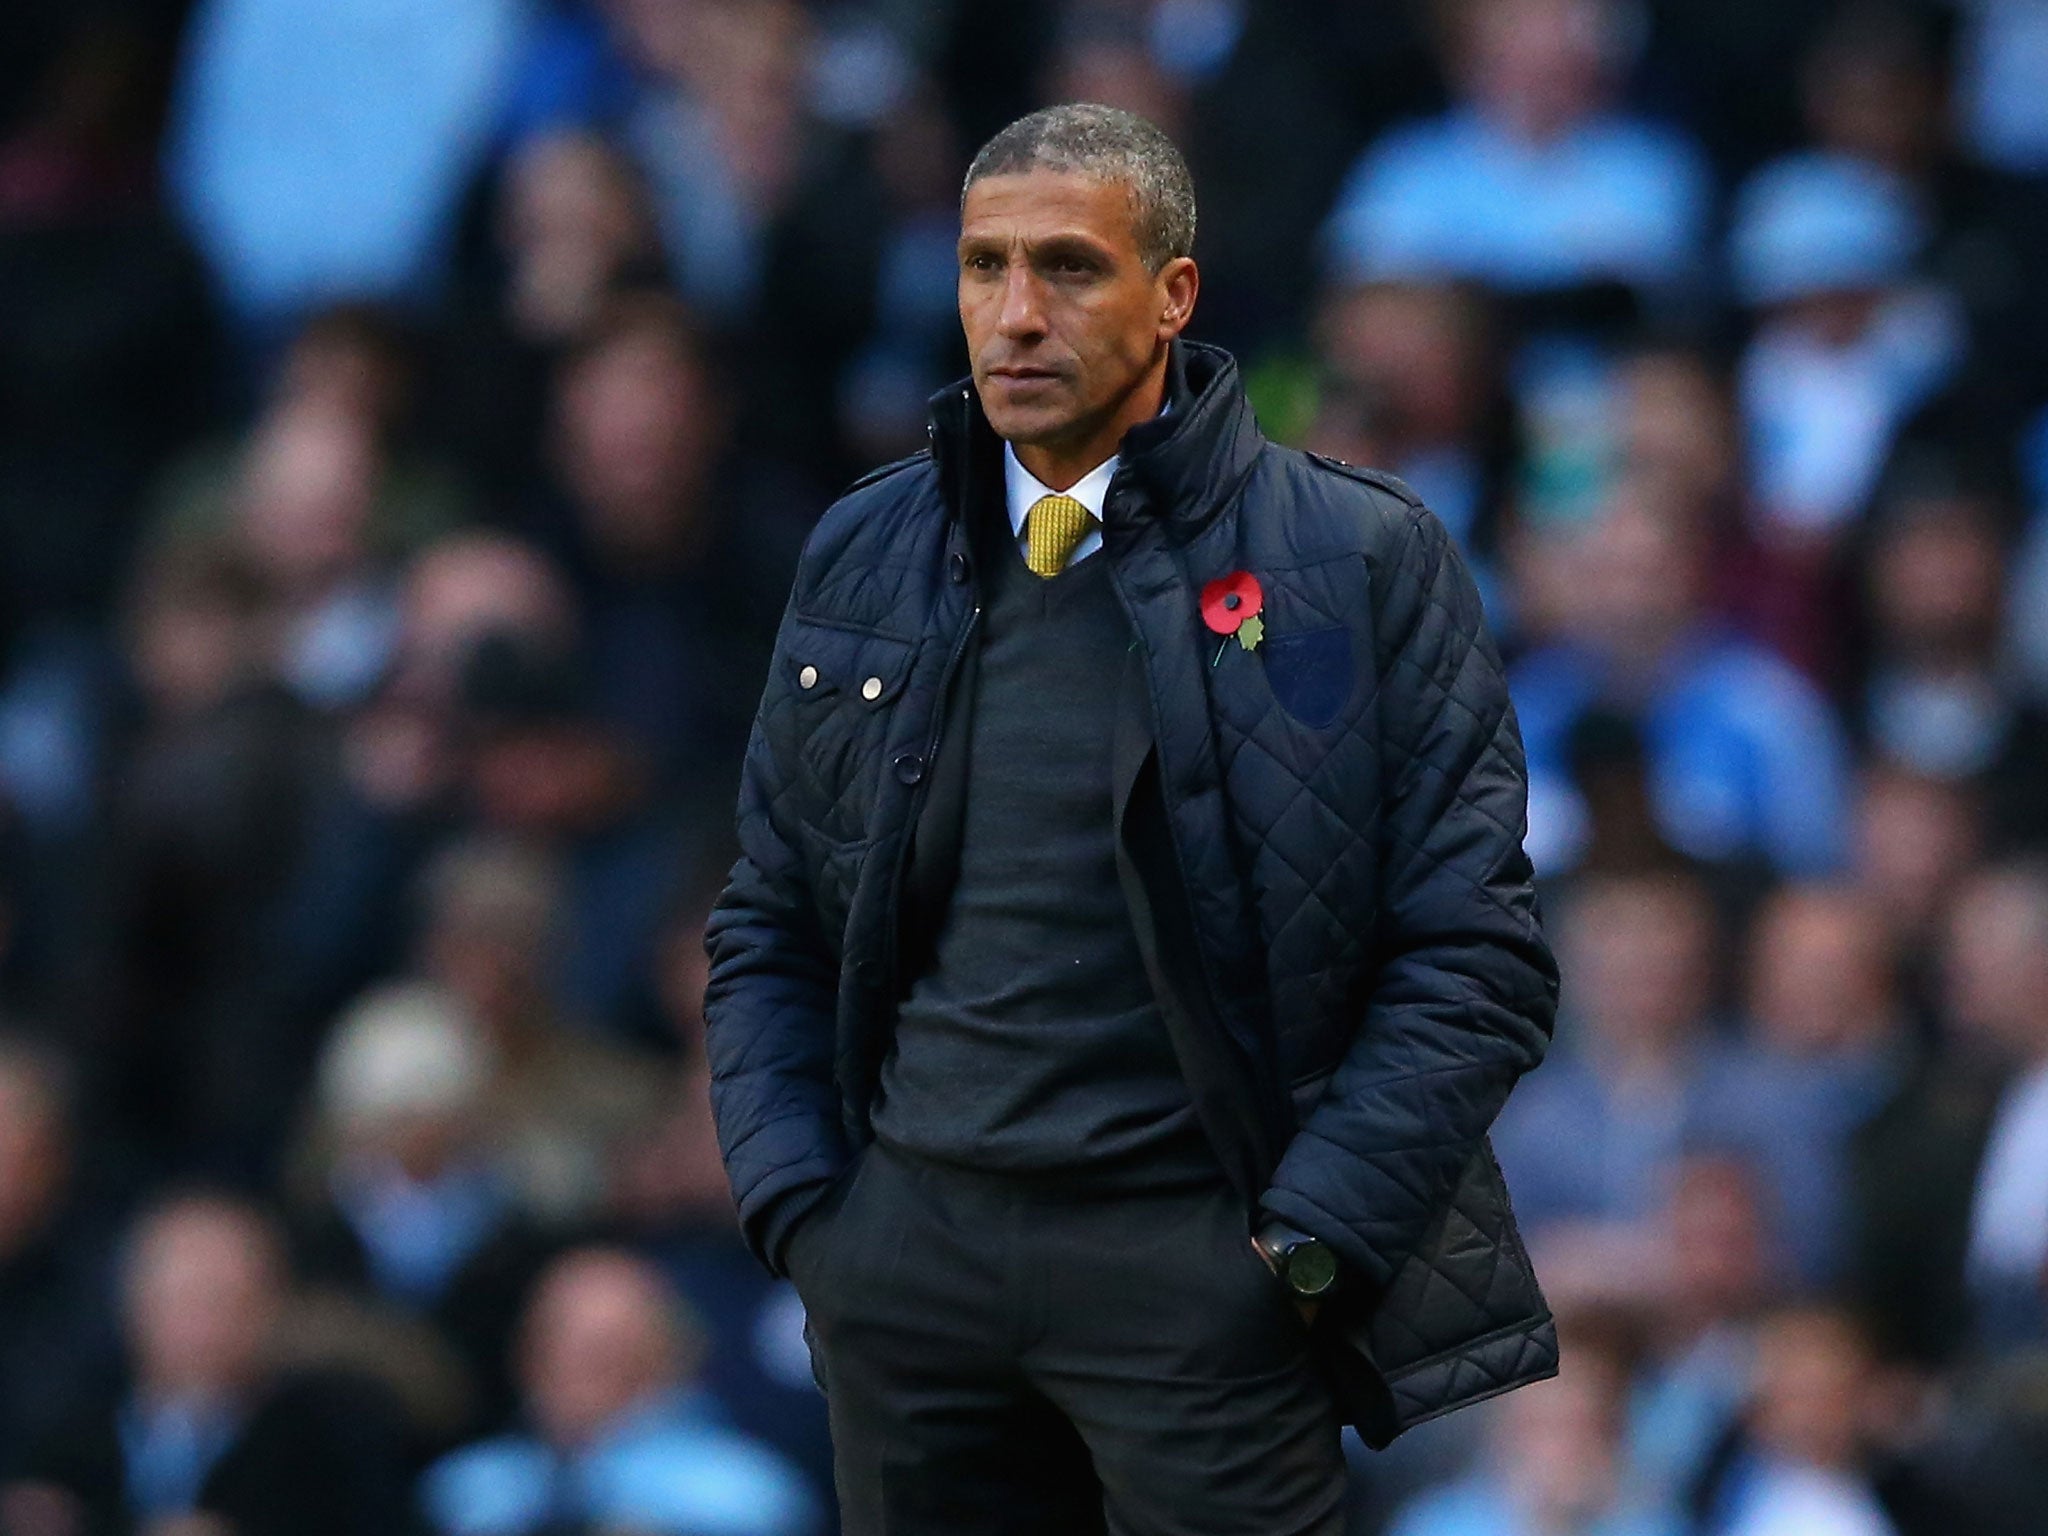 Chris Hughton looks on from the touchline